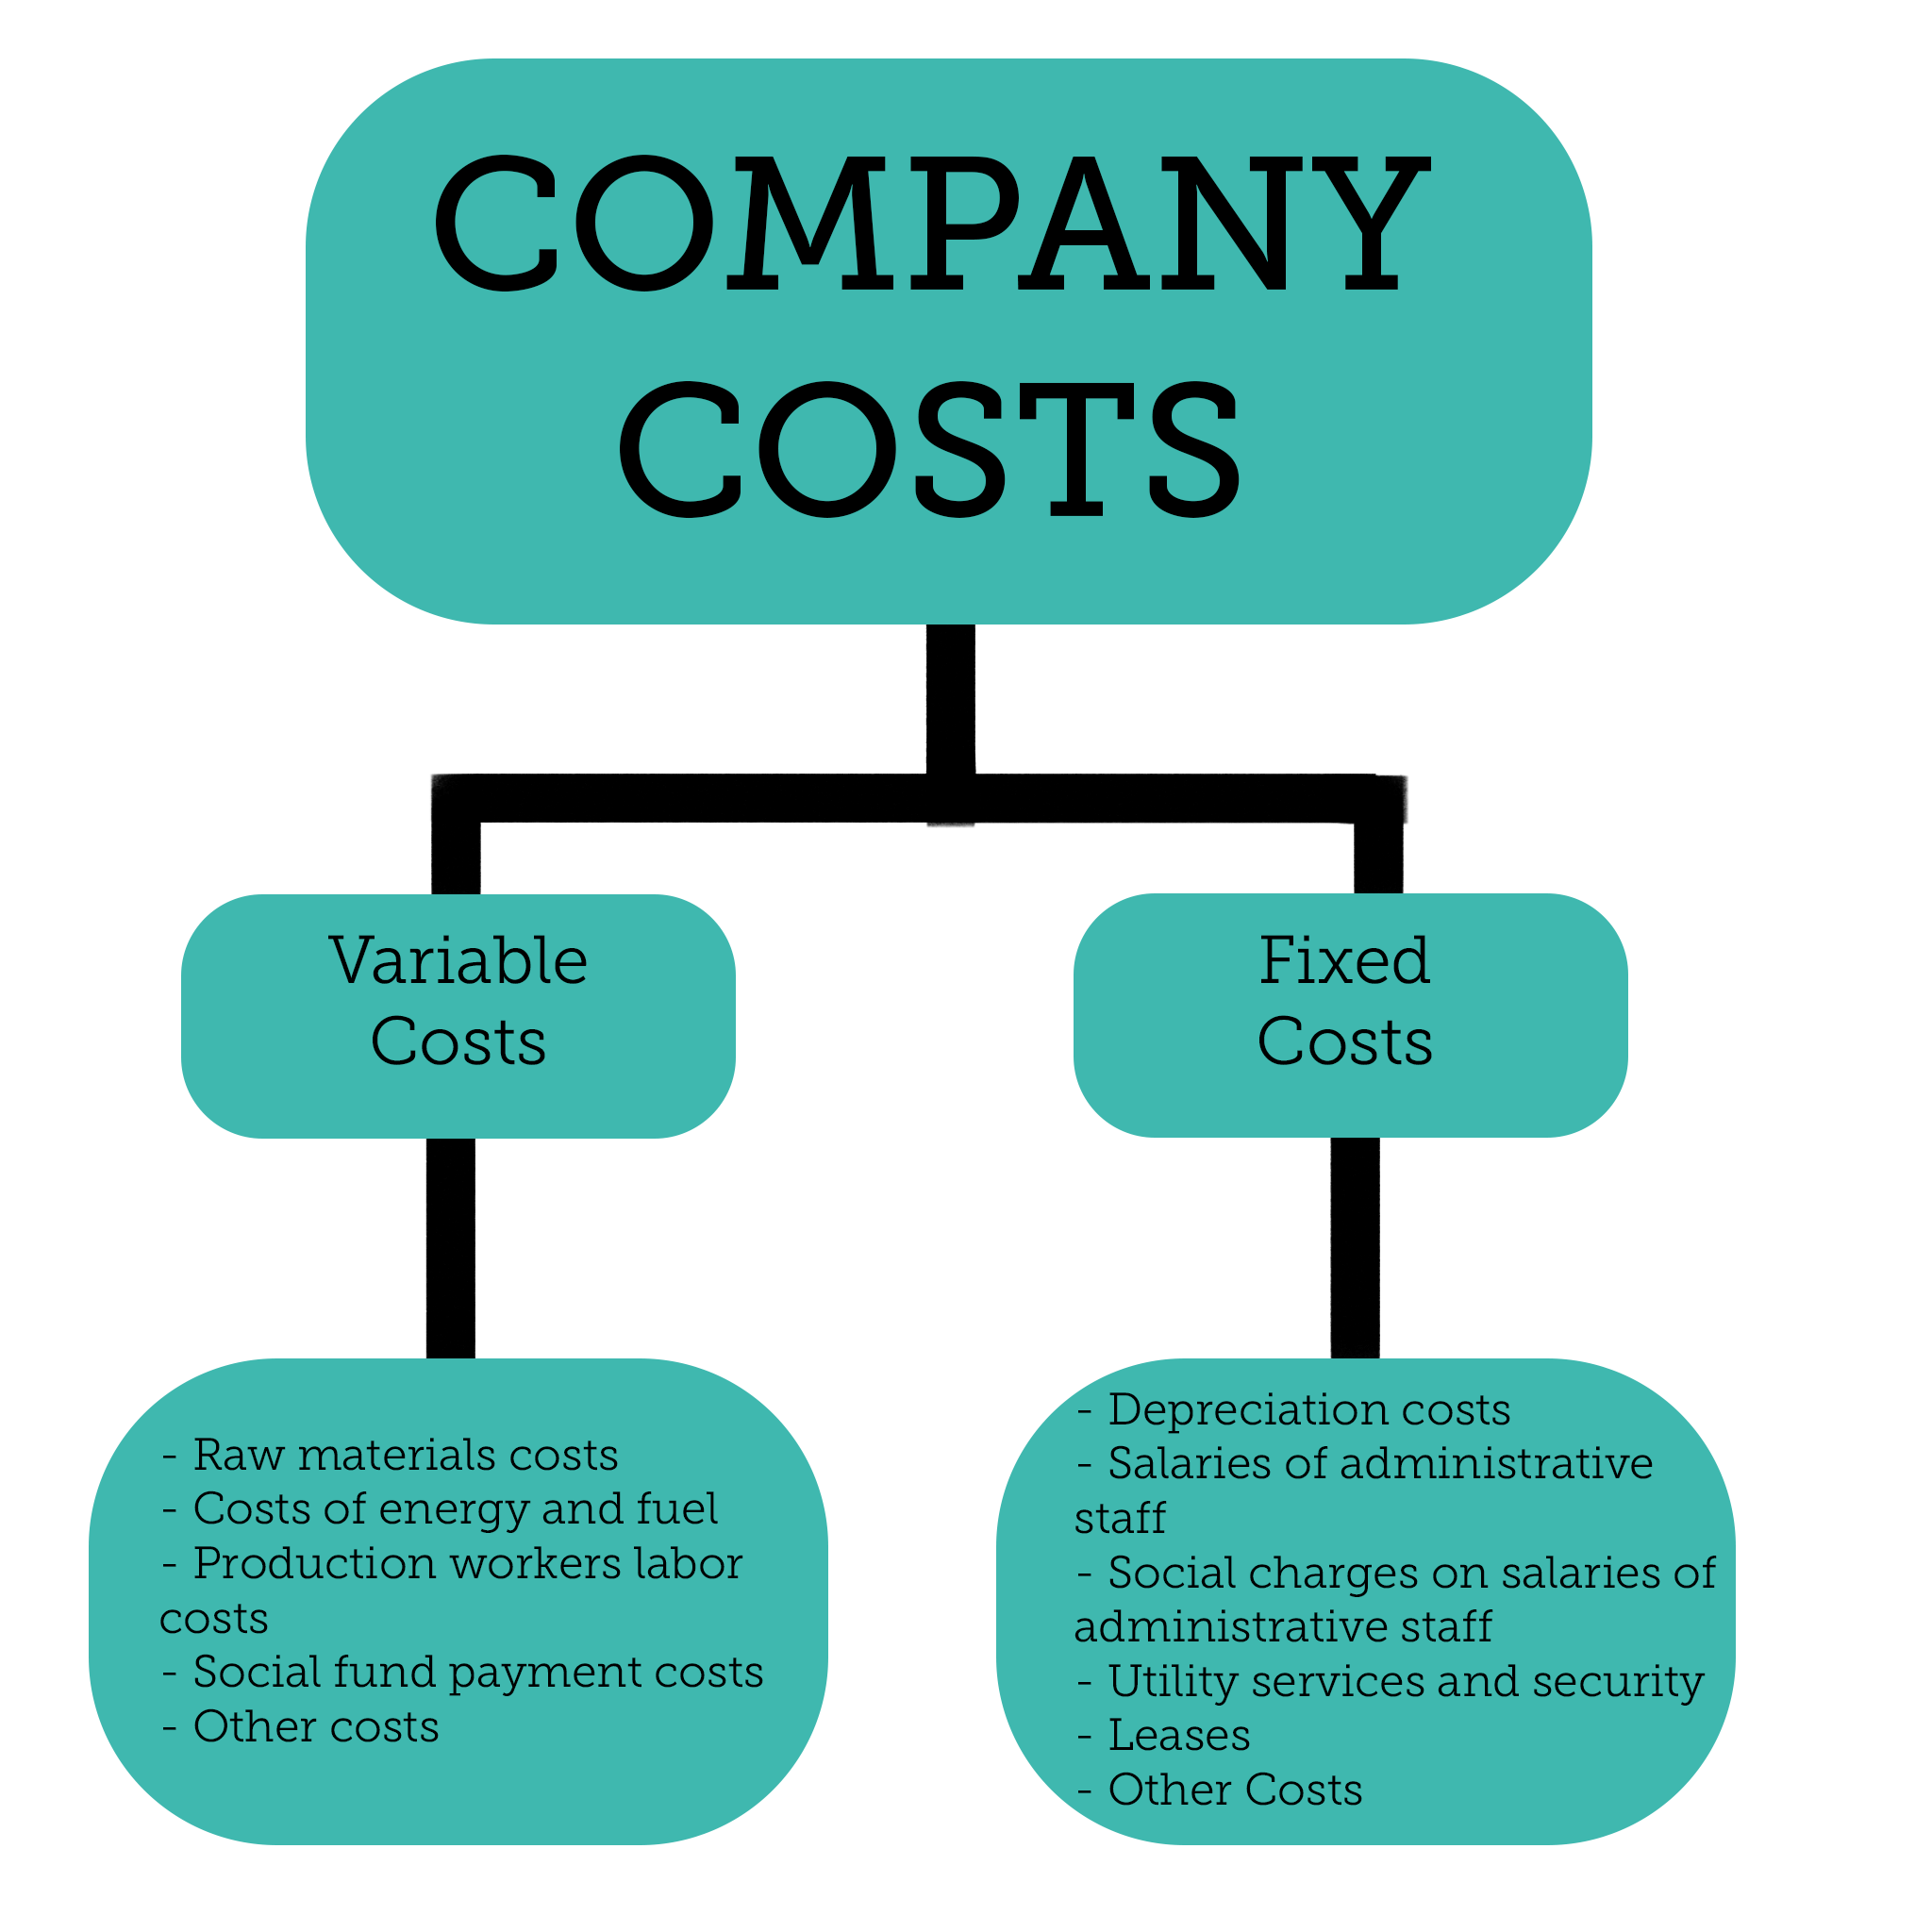 Fixed costs. Variable costs. Fixed and variable costs. Fixed and variable costs examples. Fixed and variable costs картинки.